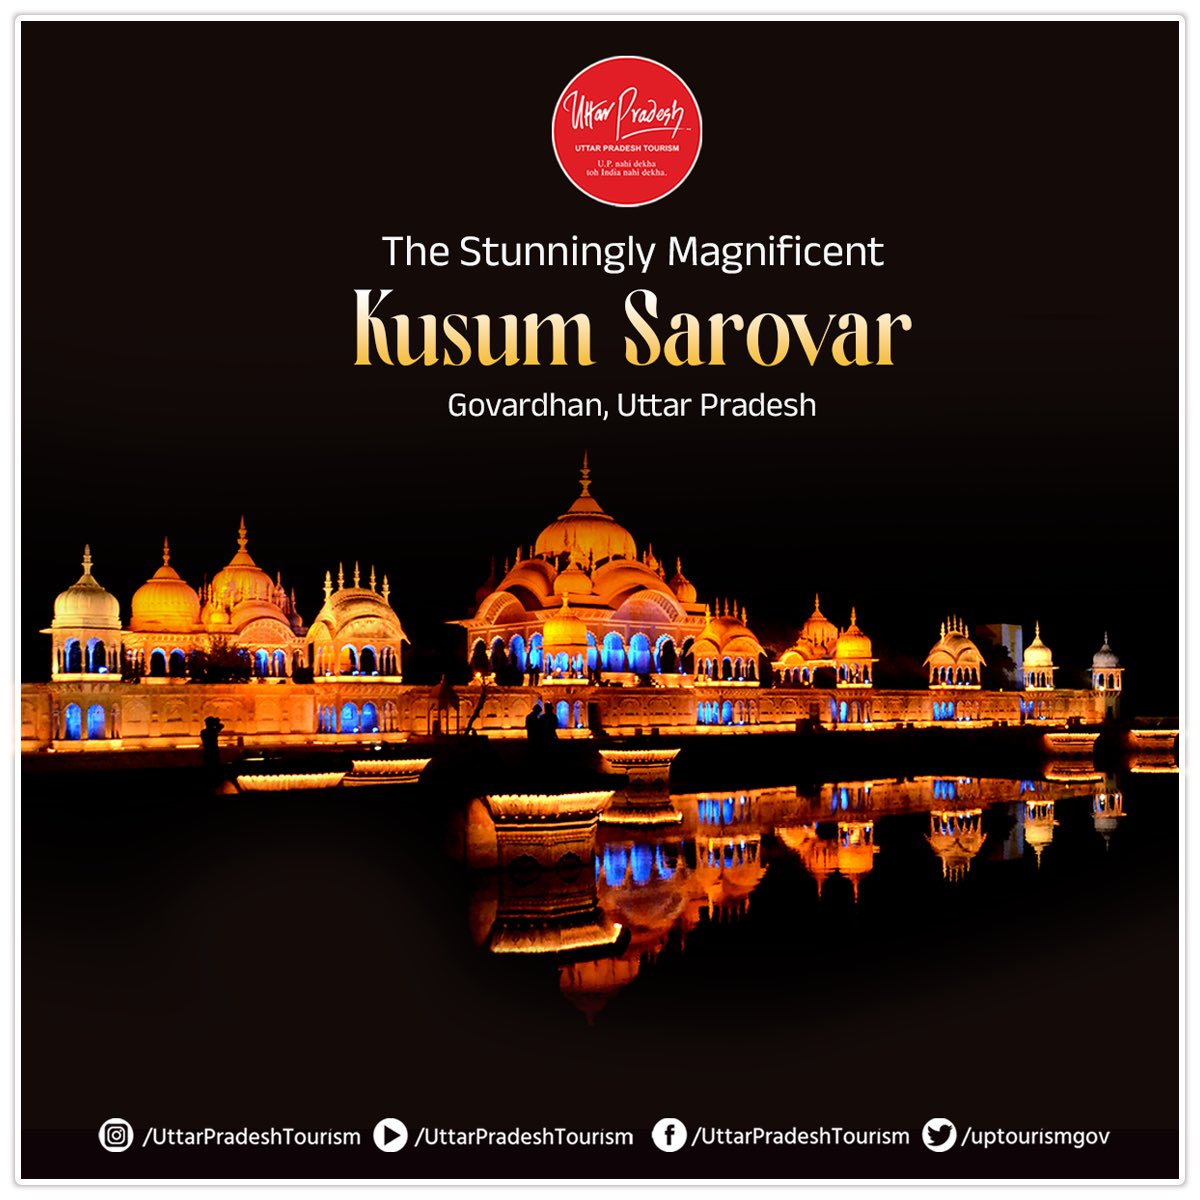 Discover the enchanting #KusumSarovar in #Govardhan. This serene setting, surrounded by intricate sandstone pavilions, offers a peaceful retreat steeped in #history & #spirituality. Perfect for moments of reflection & admiration of its #architectural & #spiritual beauty.